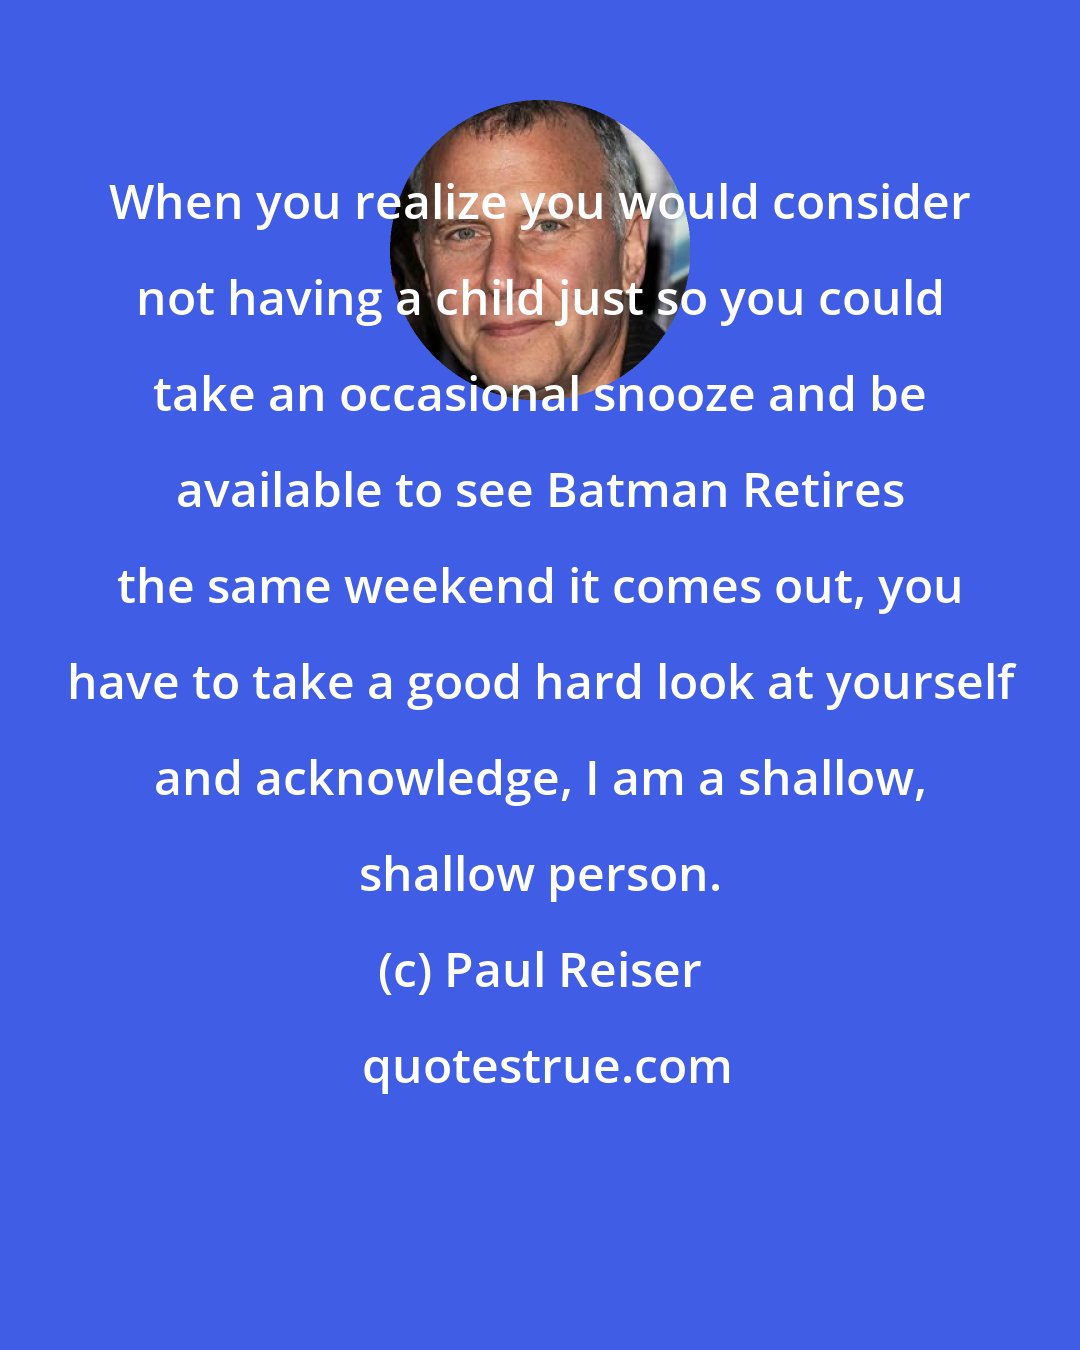 Paul Reiser: When you realize you would consider not having a child just so you could take an occasional snooze and be available to see Batman Retires the same weekend it comes out, you have to take a good hard look at yourself and acknowledge, I am a shallow, shallow person.